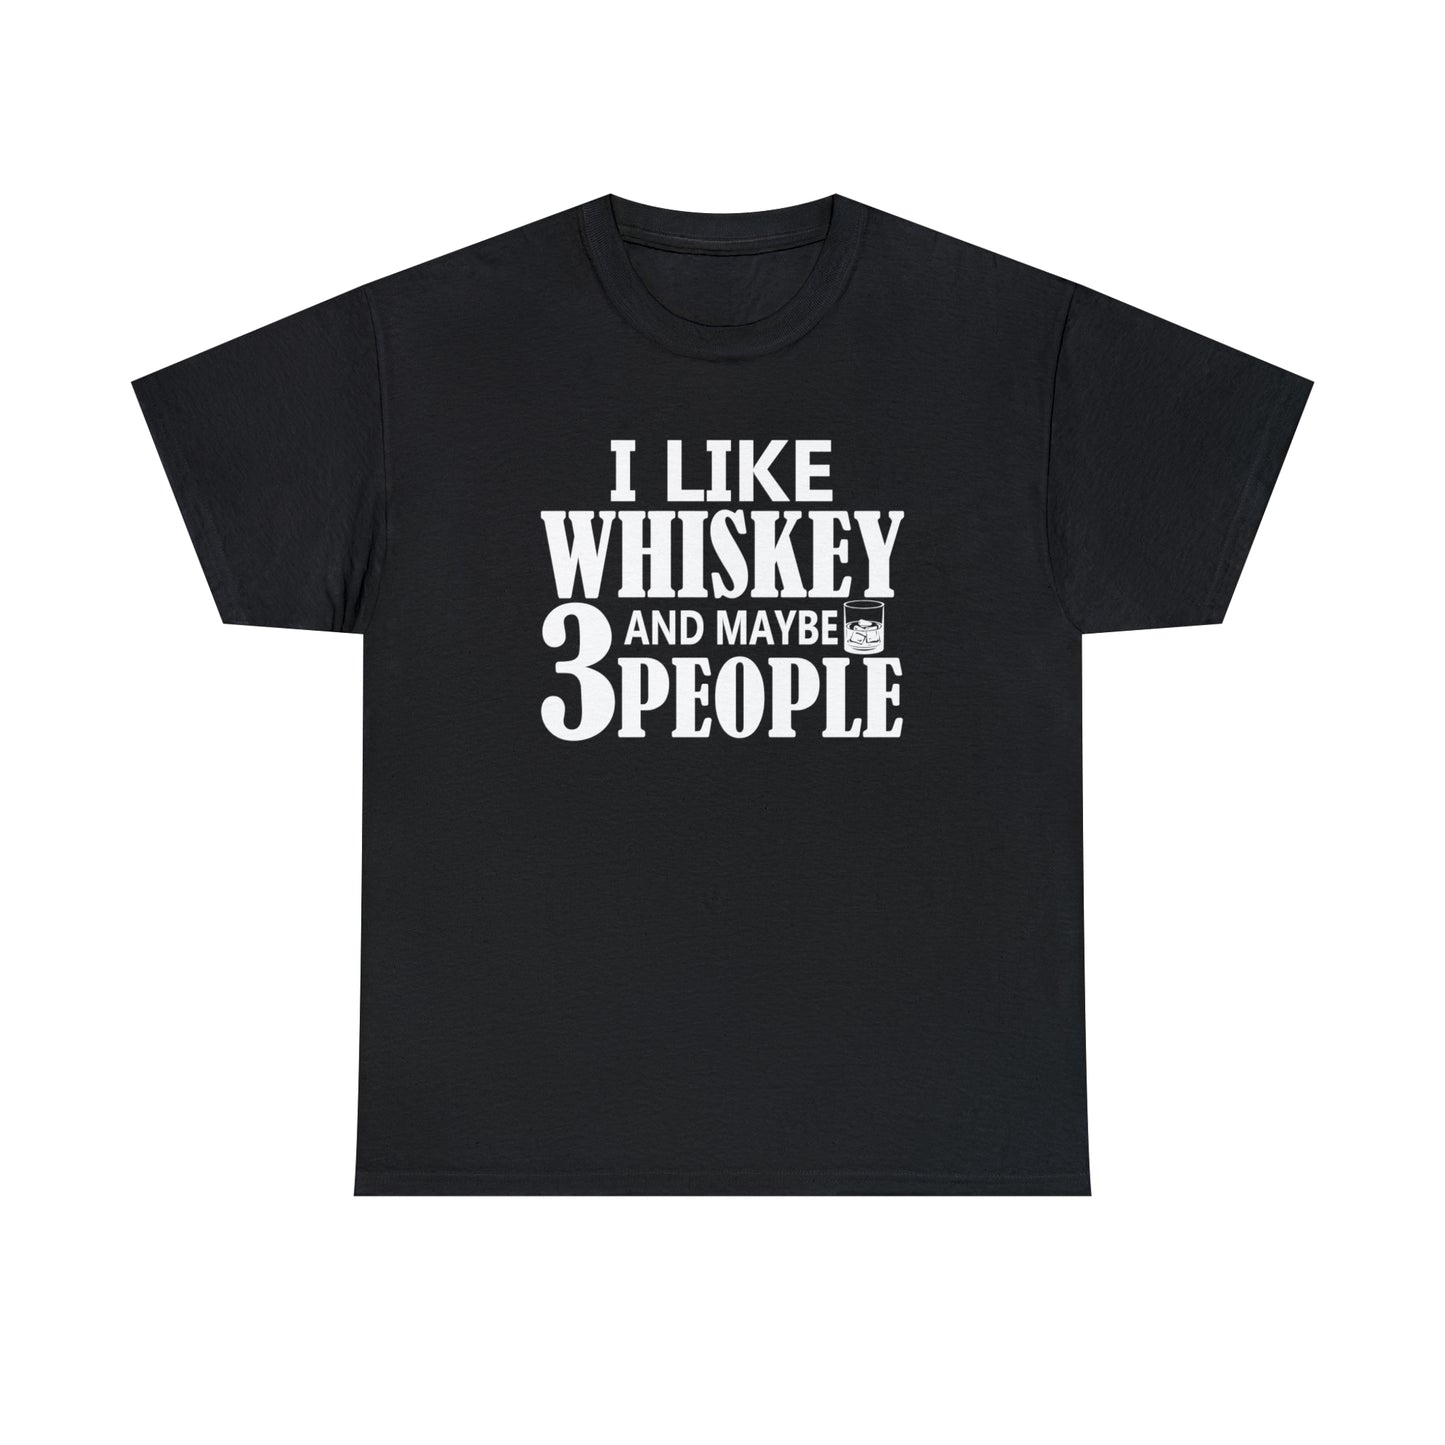 Humorous whiskey lover's t-shirt with a witty saying.